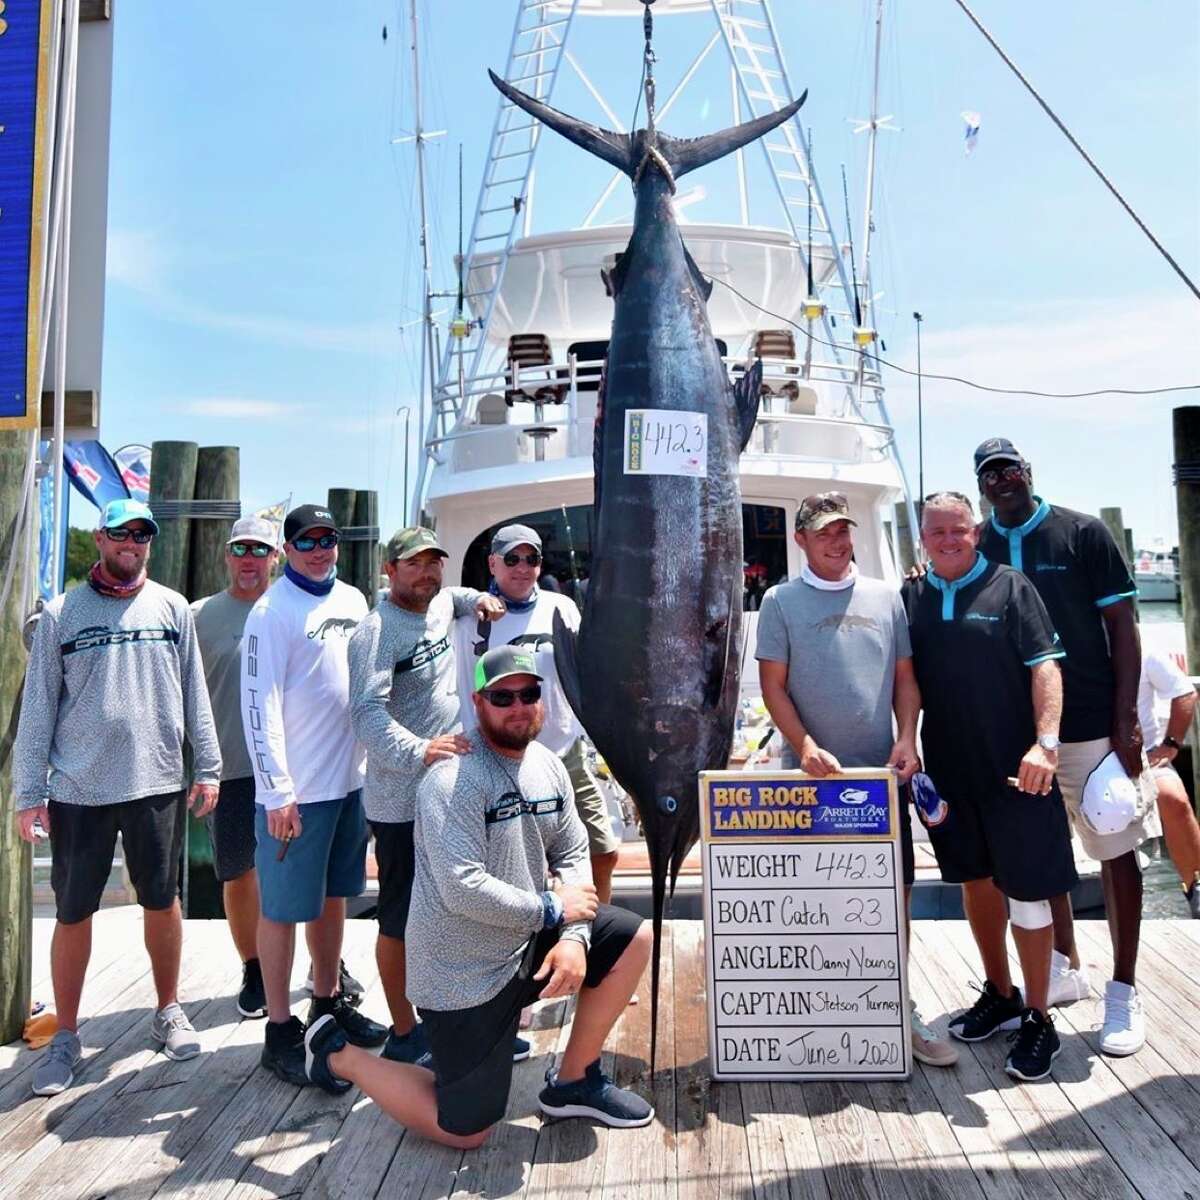 In a photo provided by Grace Bell, Michael Jordan, right, and the crew of his 80-foot fishing boat named aCatch 23a pose after hauling in a 442.3-pound blue marlin Tuesday, June 9, 2020, at the Big Rock Blue Marlin Tournament in Morehead City, N.C. (Grace Bell via AP)